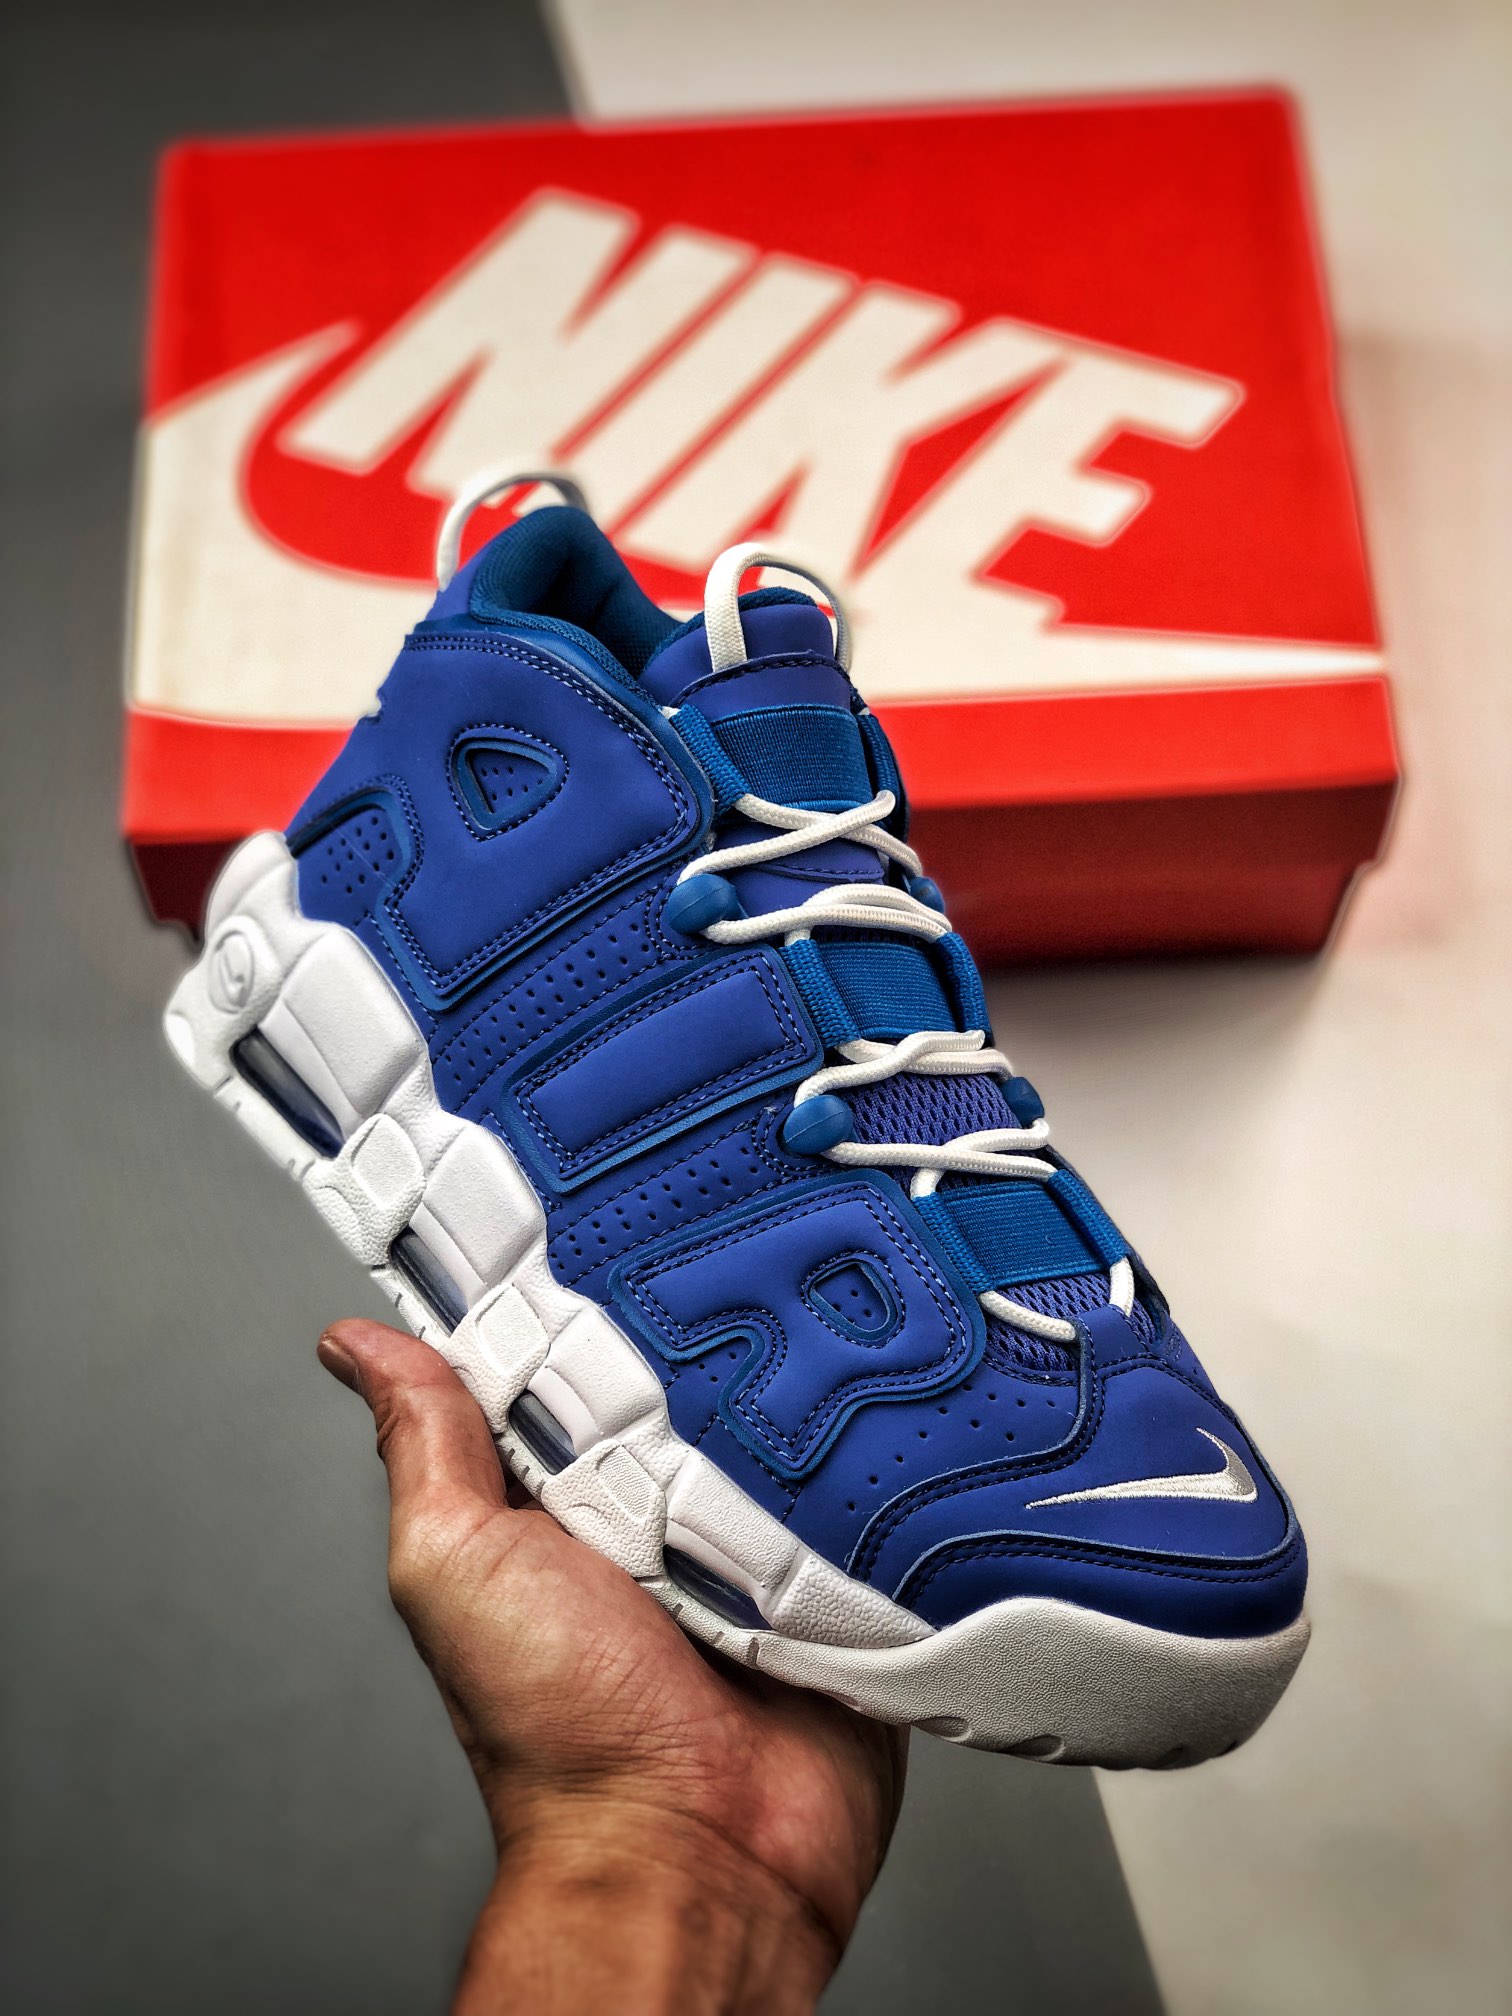 Nike Air More Uptempo Blue and White DM1023-400 Shoes